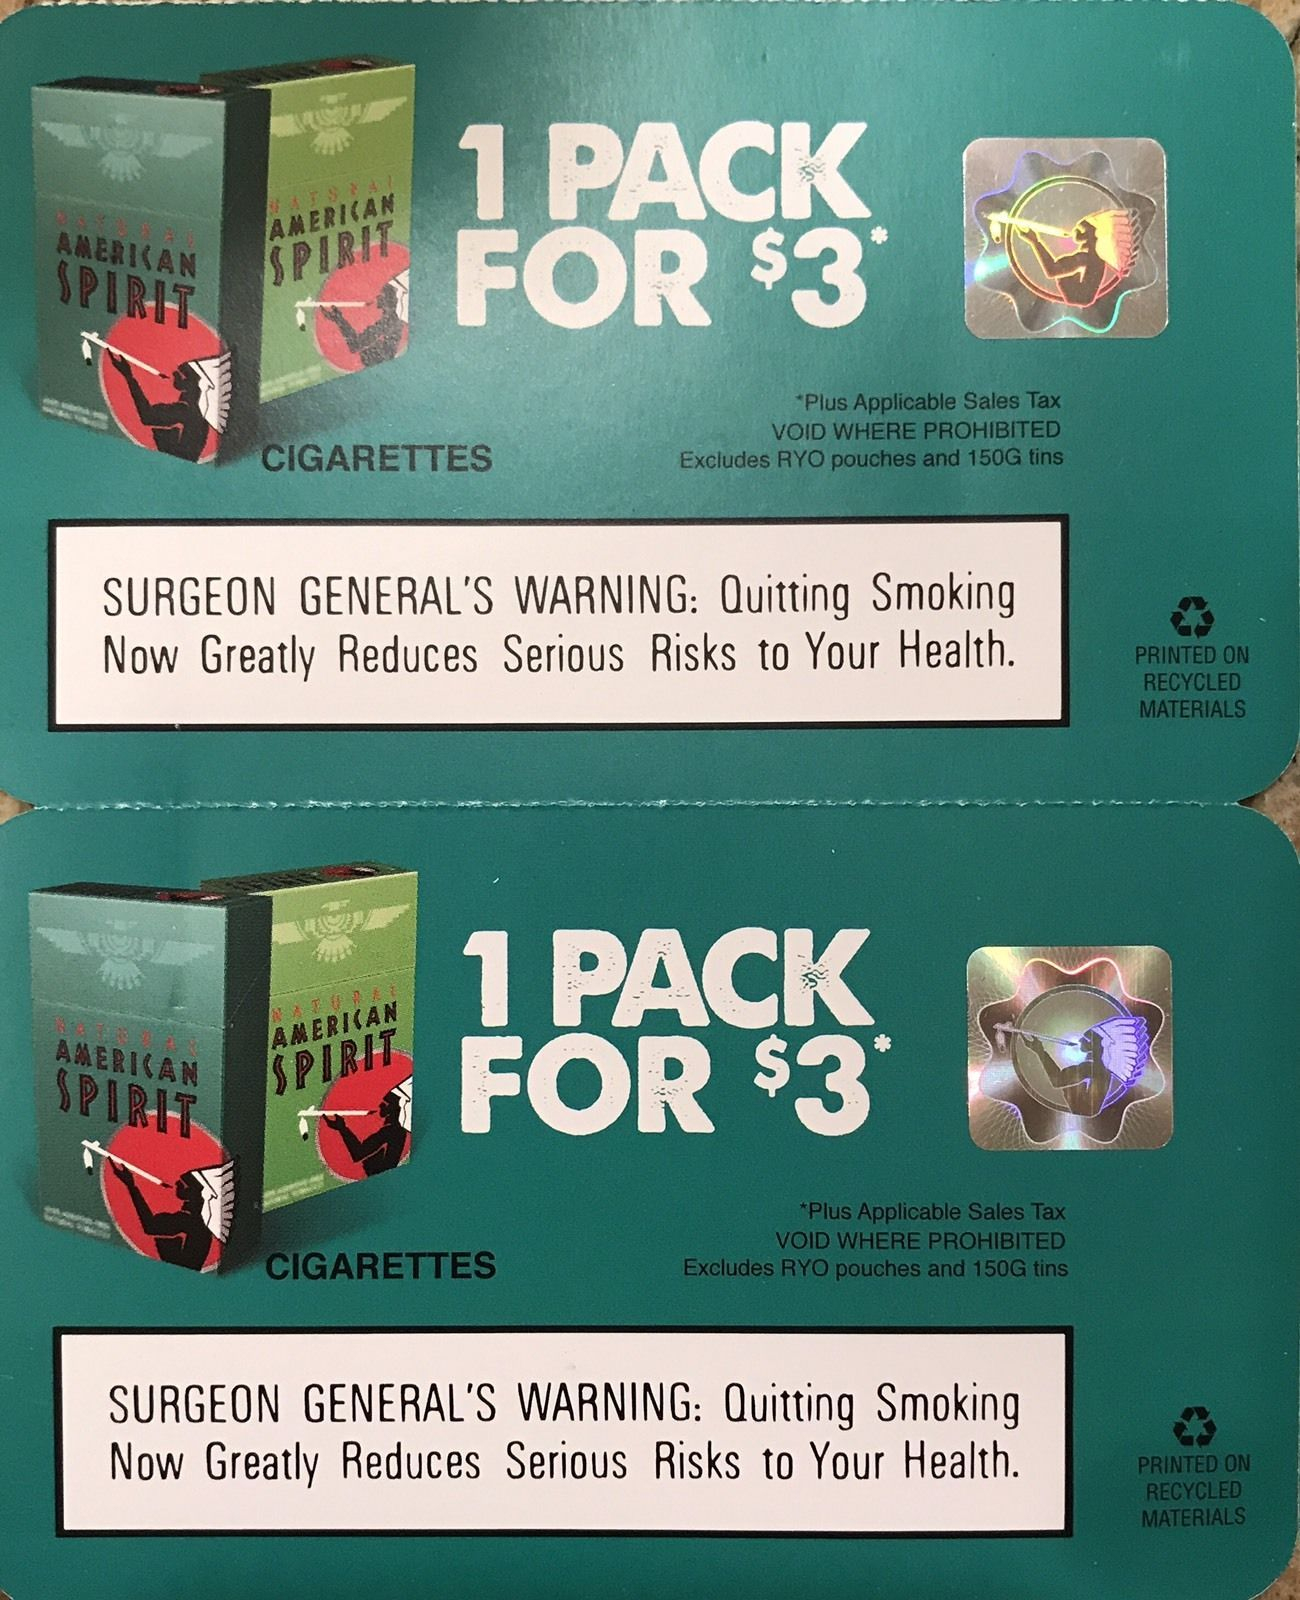 Free Pack Of Cigarettes Coupon - Wow - Image Results | Cigarros - Free Pack Of Cigarettes Printable Coupon